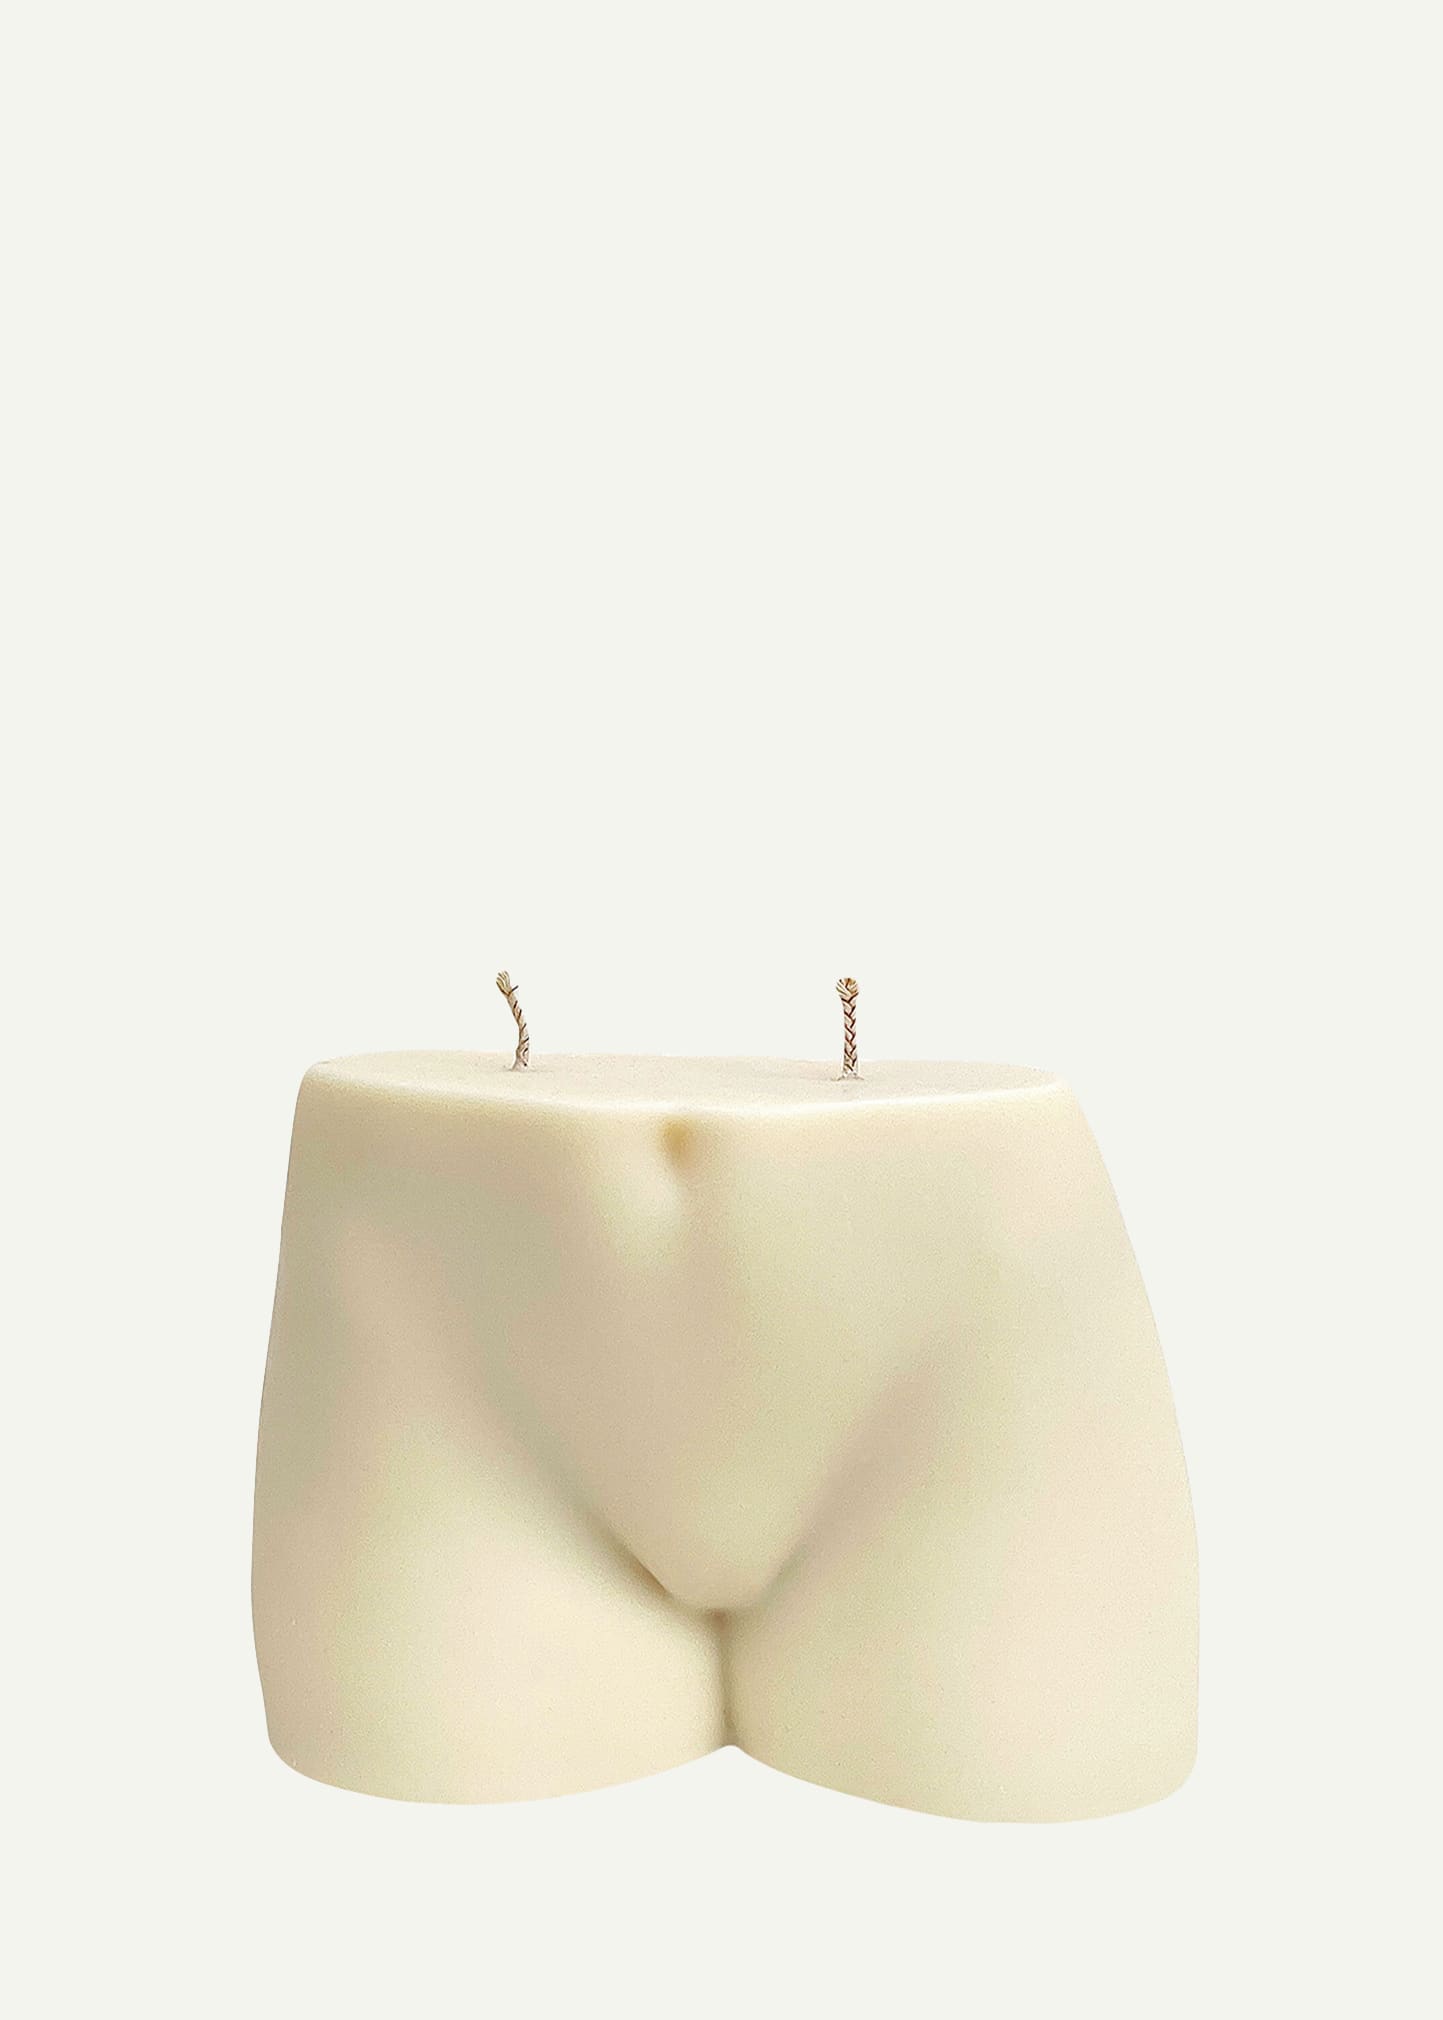 Caiyu Candle 45.8 Oz. Le Petit Derriere Non-scented Candle In White